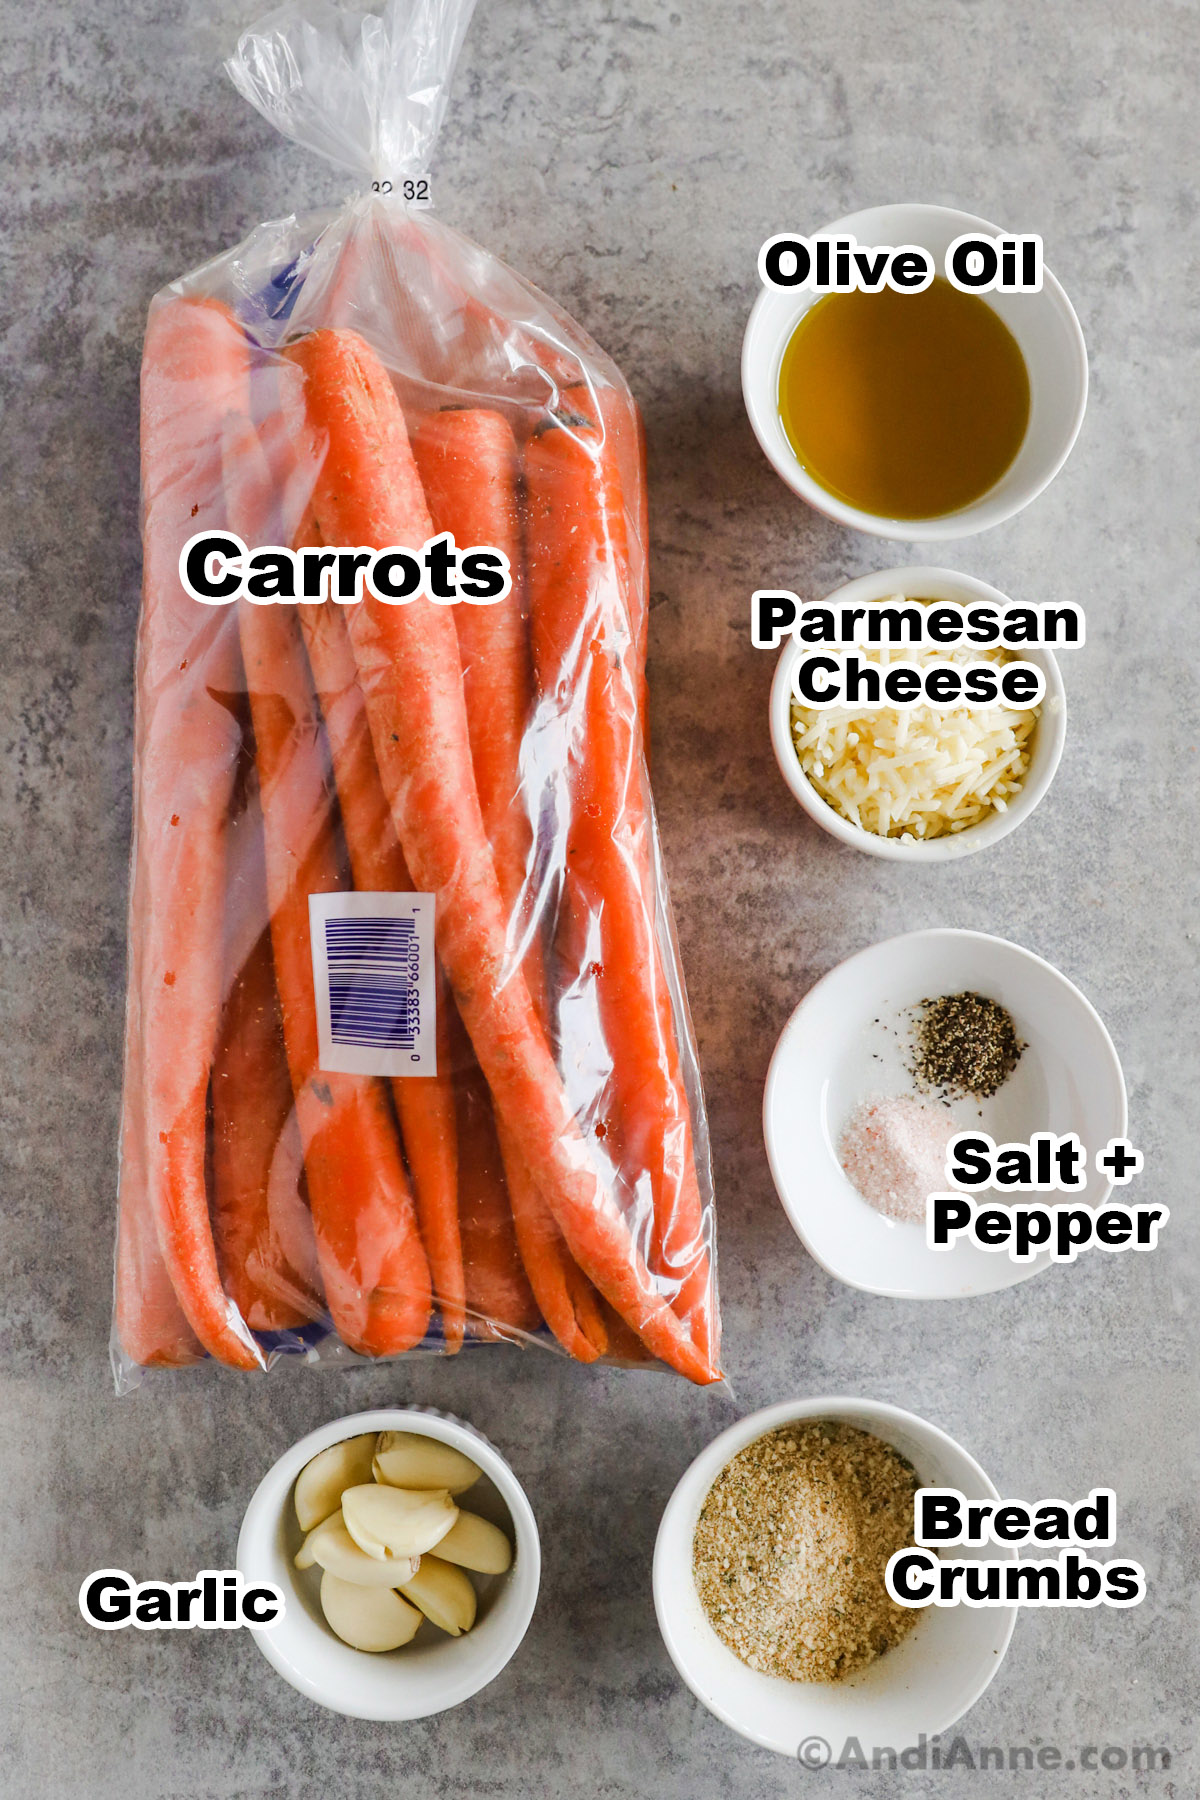 Recipe ingredients including a bag of carrots, bowl of olive oil, grated parmesan cheese, salt and pepper, garlic cloves, and bread crumbs.